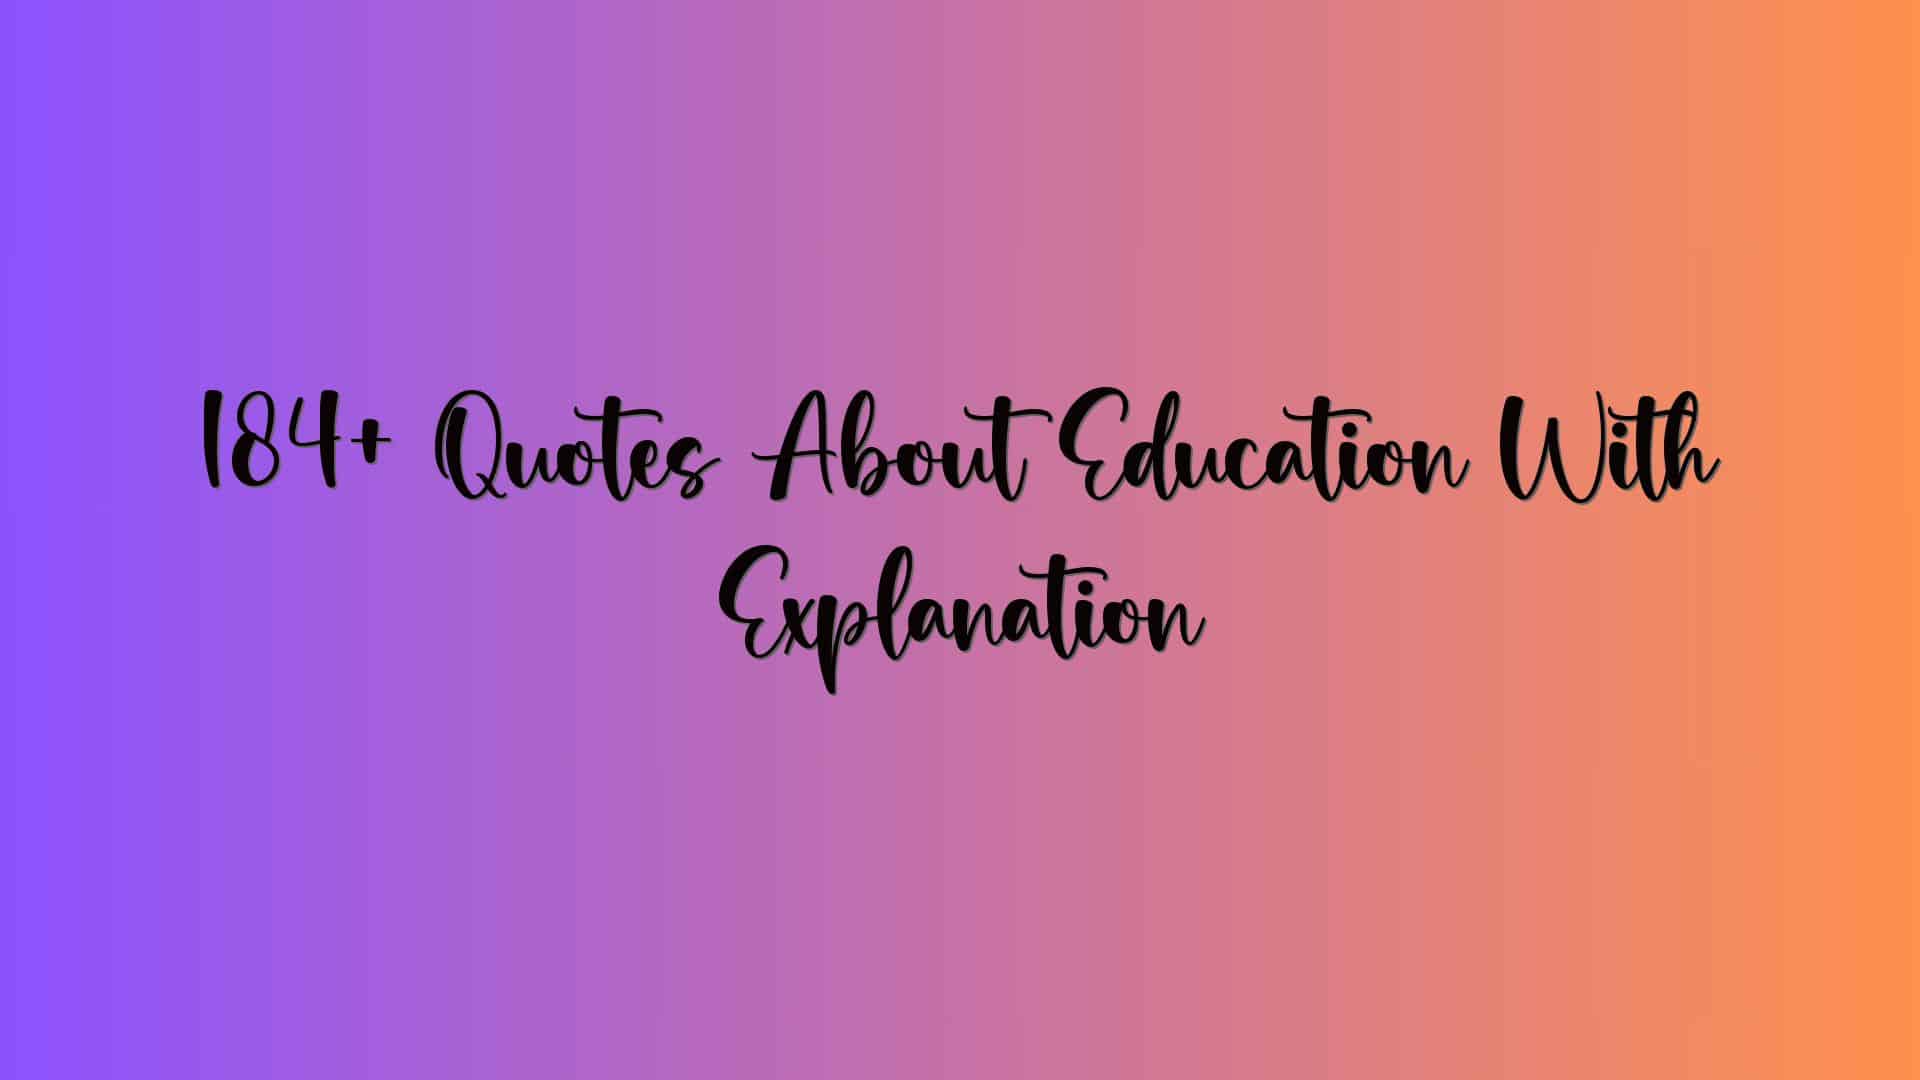 184+ Quotes About Education With Explanation